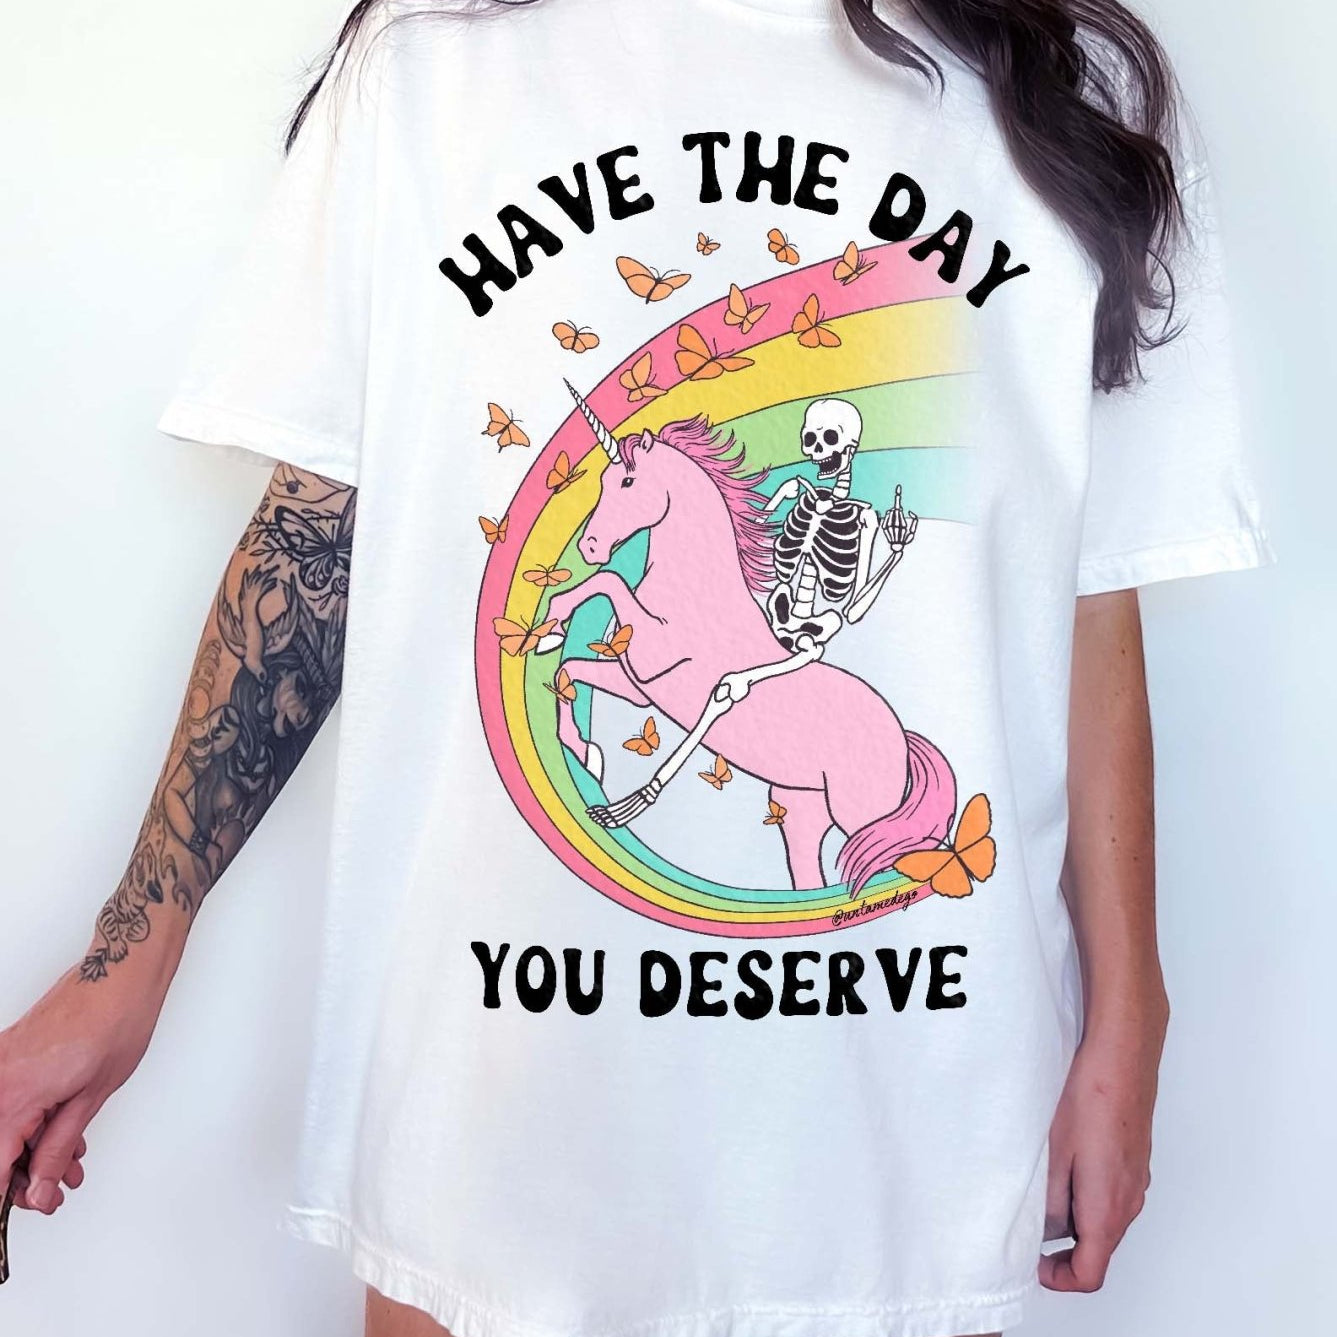 Have The Day You Deserve Exclusive Tee - UntamedEgo LLC.